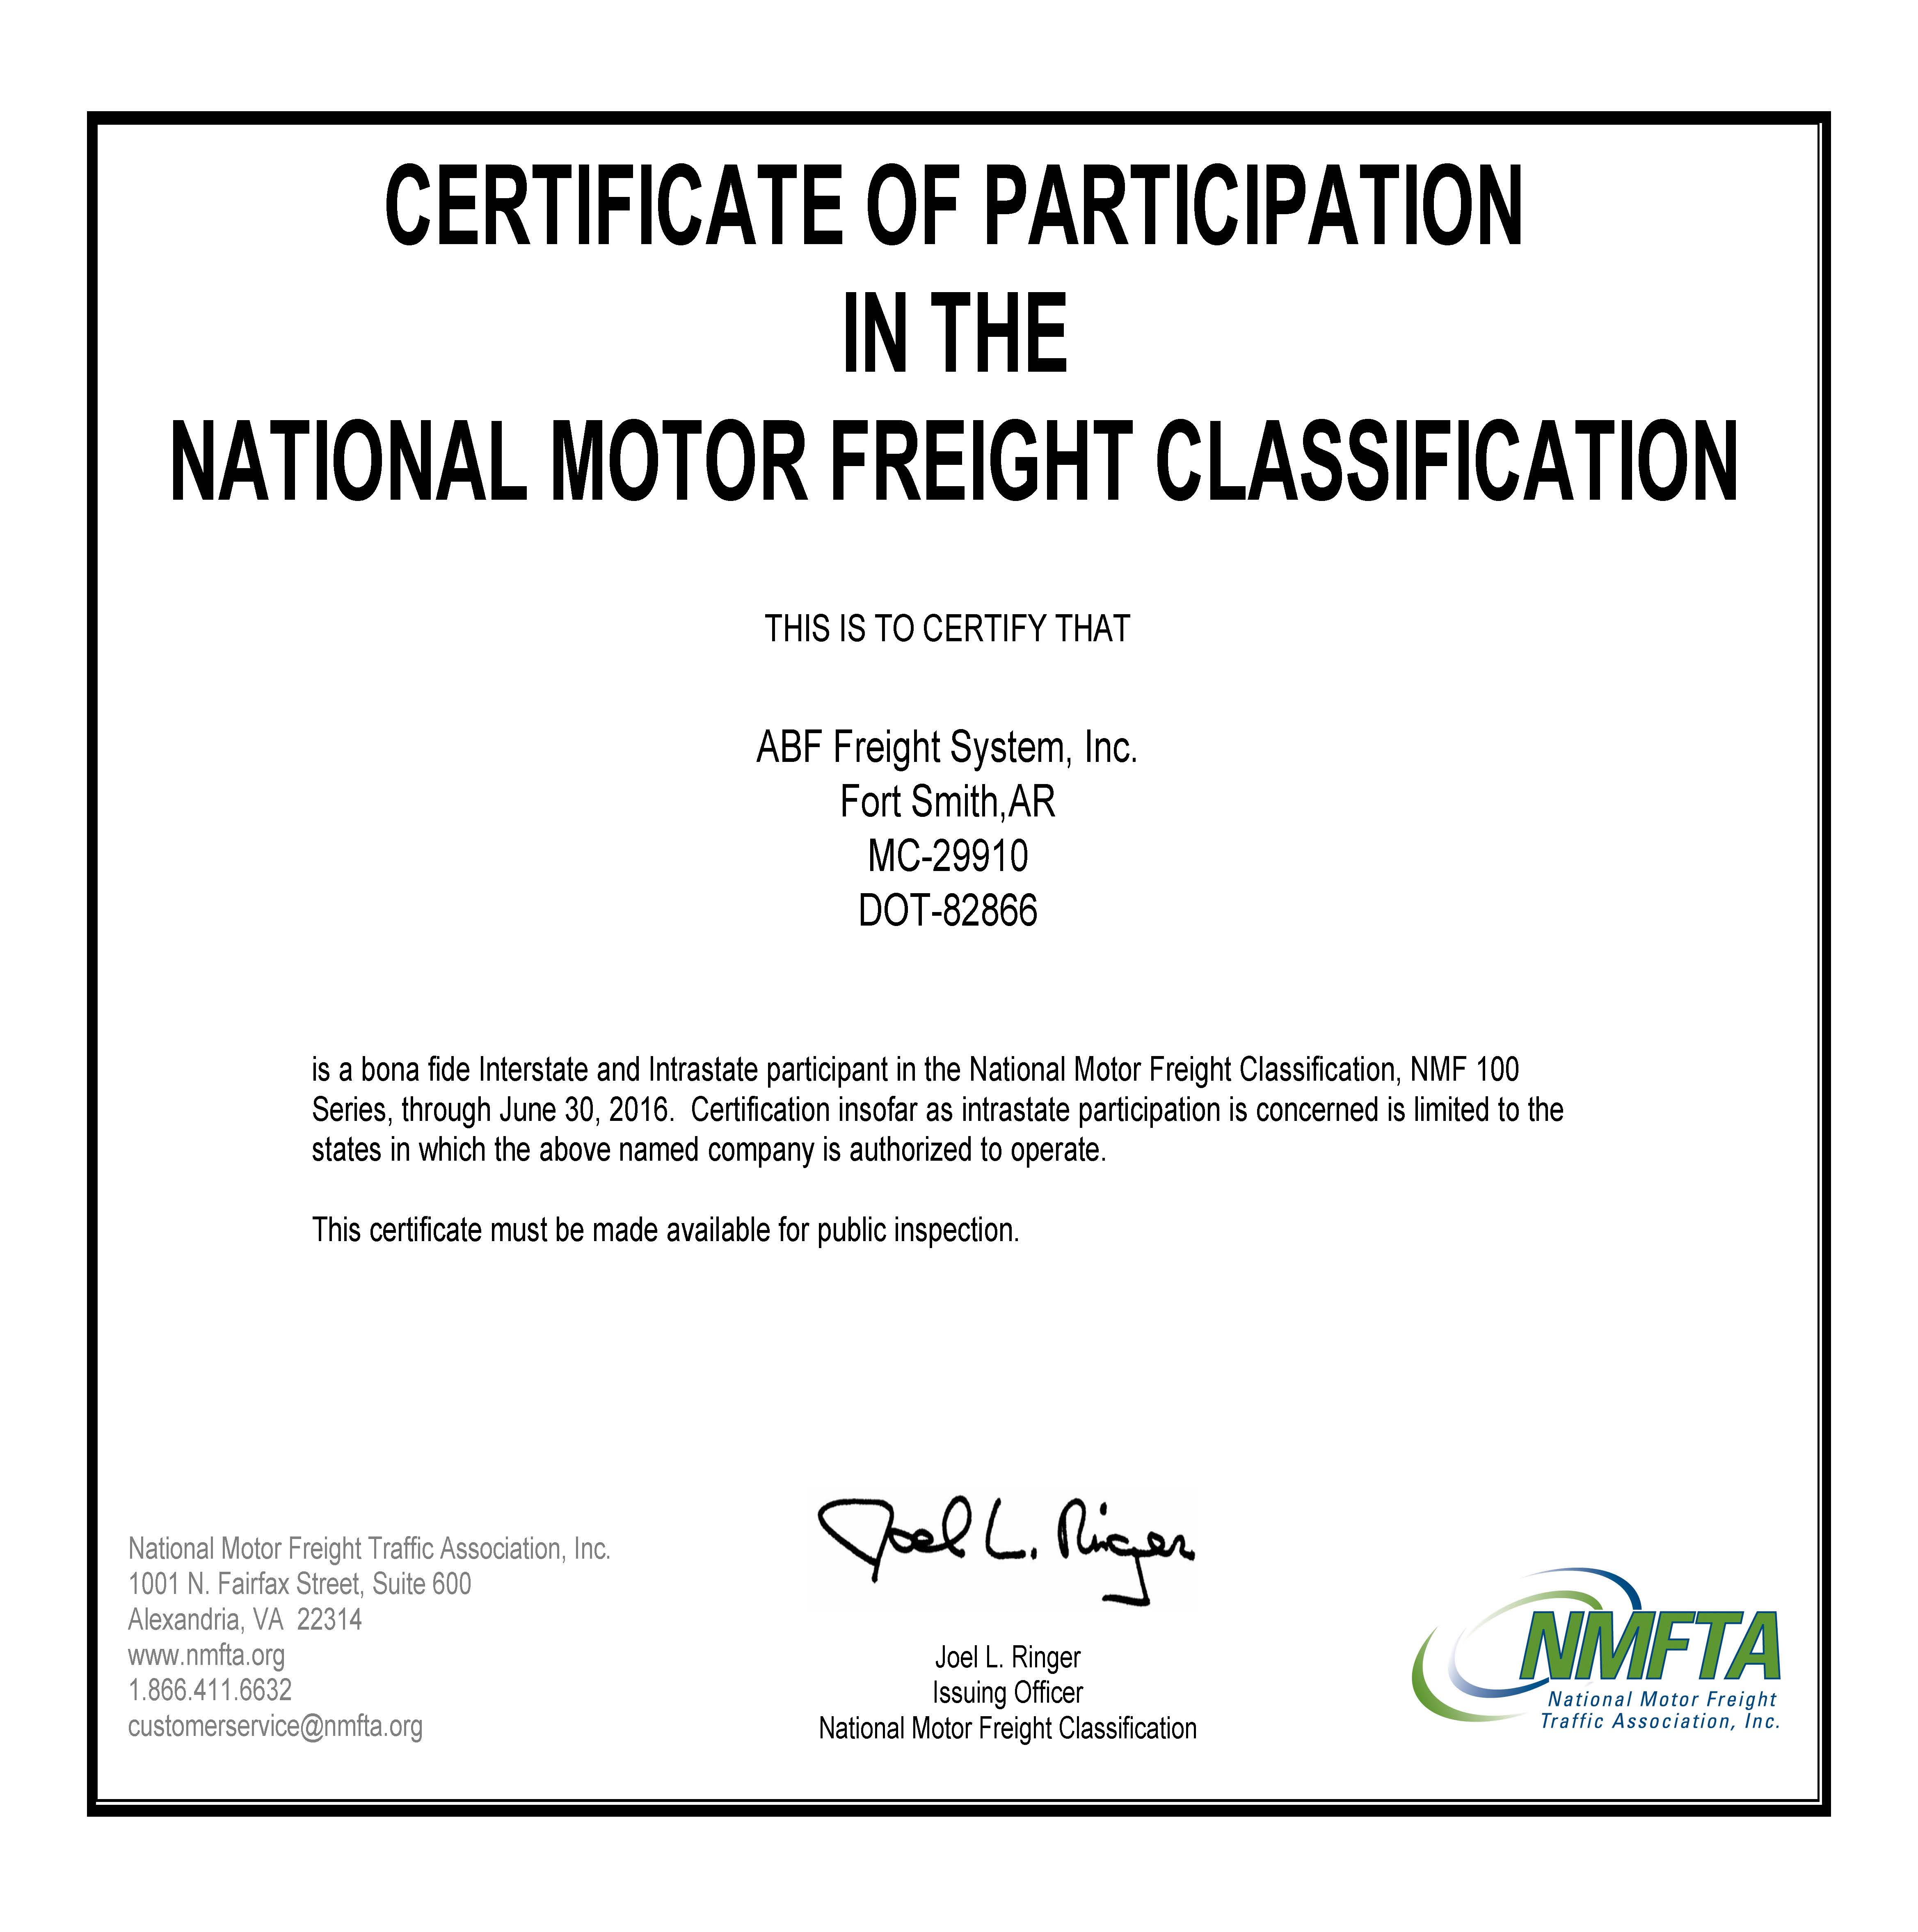 What information is in the National Motor Freight Classification Guide?